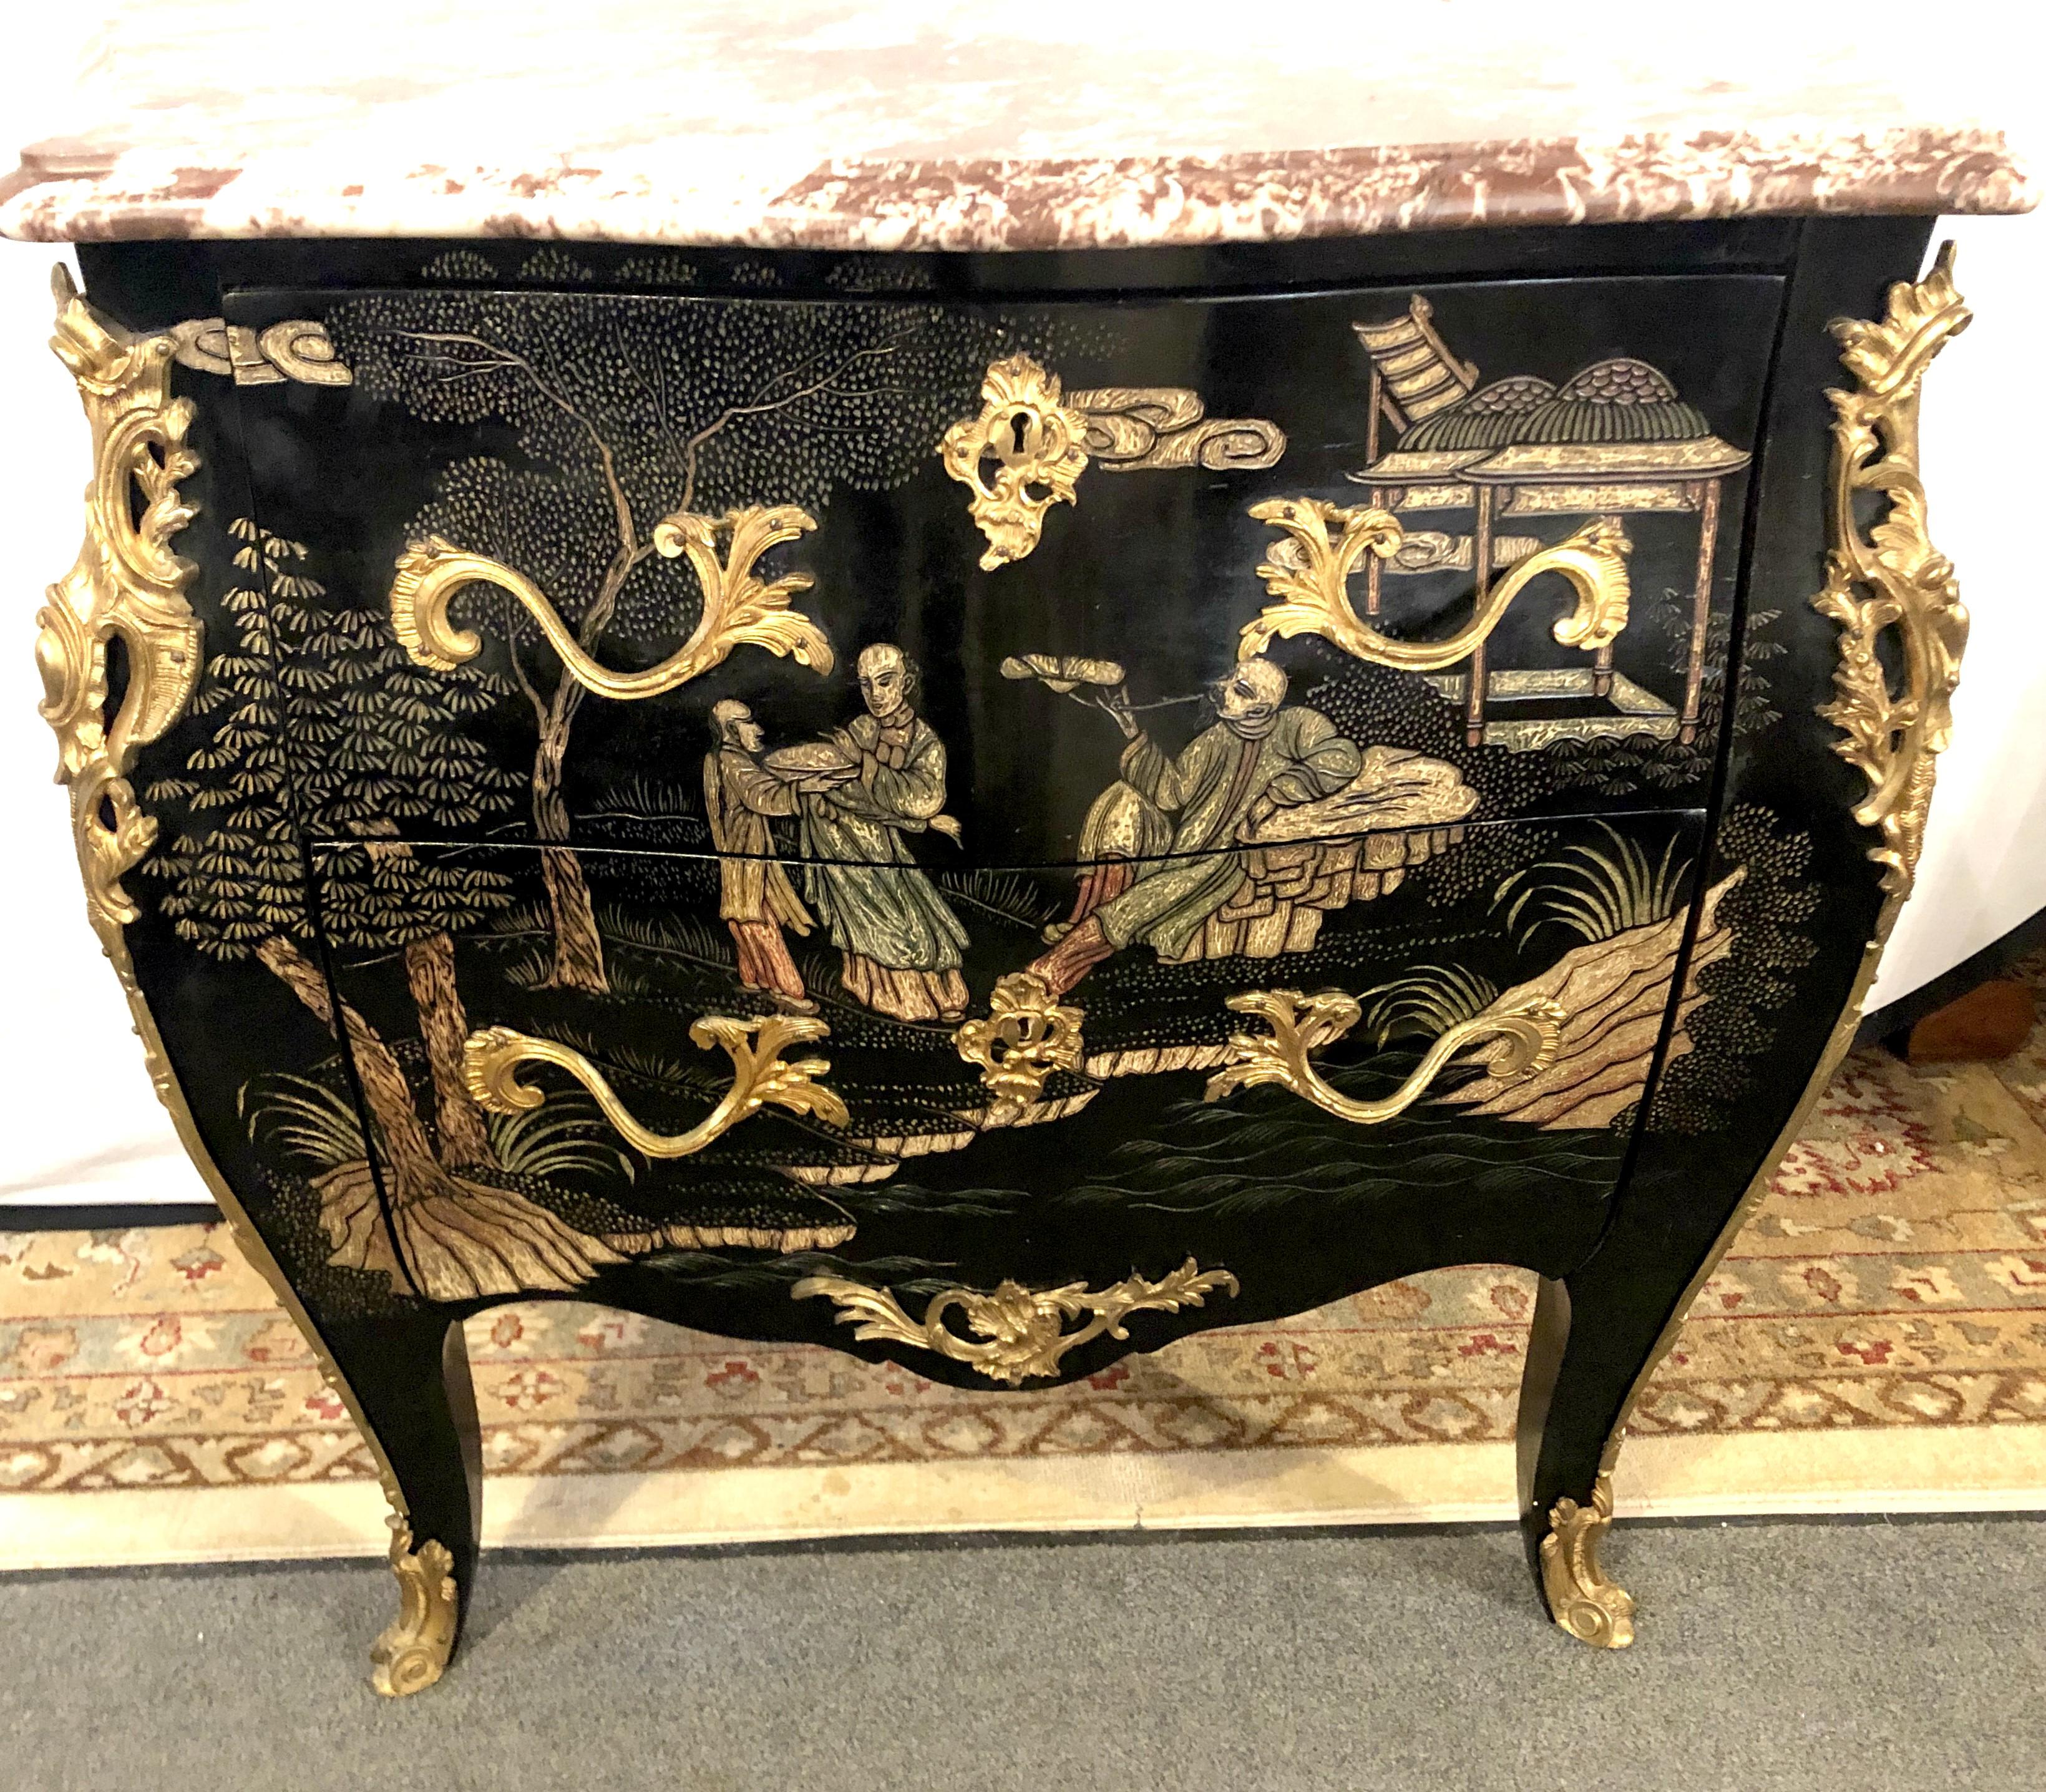 An antique Louis XV style ebonized and bronze-mounted bocbe chinoiserie marble-top commode or nightstand. This finely constructed commode has a bombe form with all over raised decorative design of vibrant colors supporting a marble top.